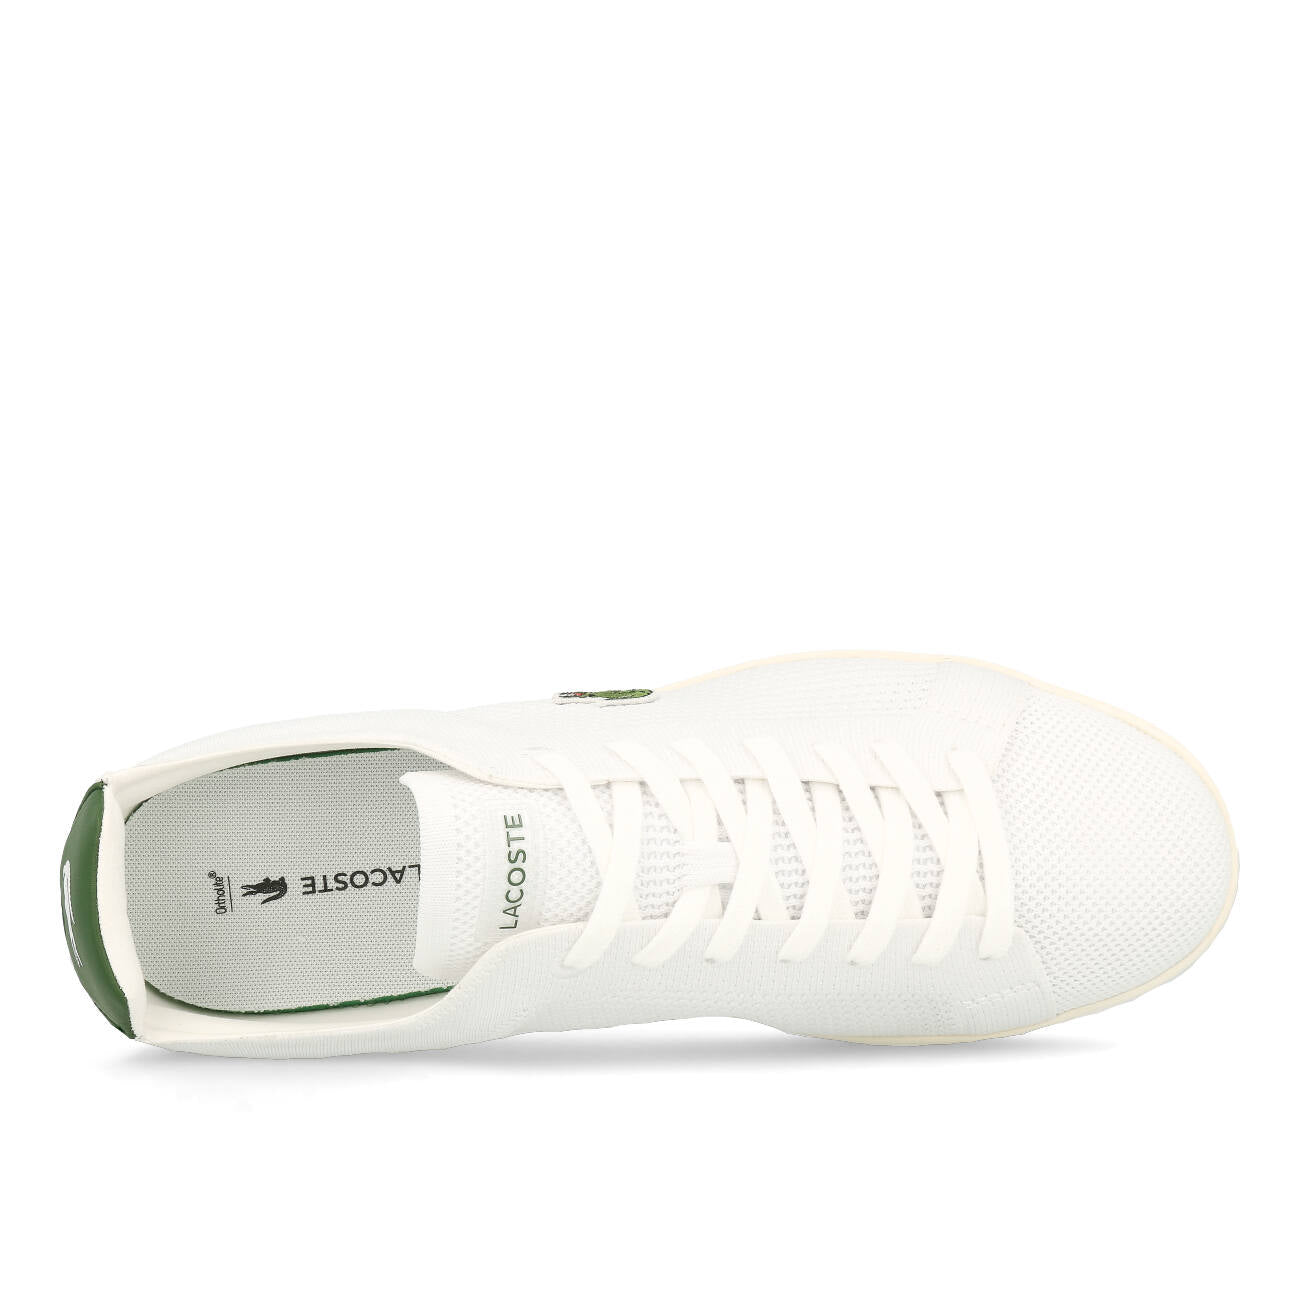 Lacoste Carnaby Piquee 123 1 SMA Herren White Green